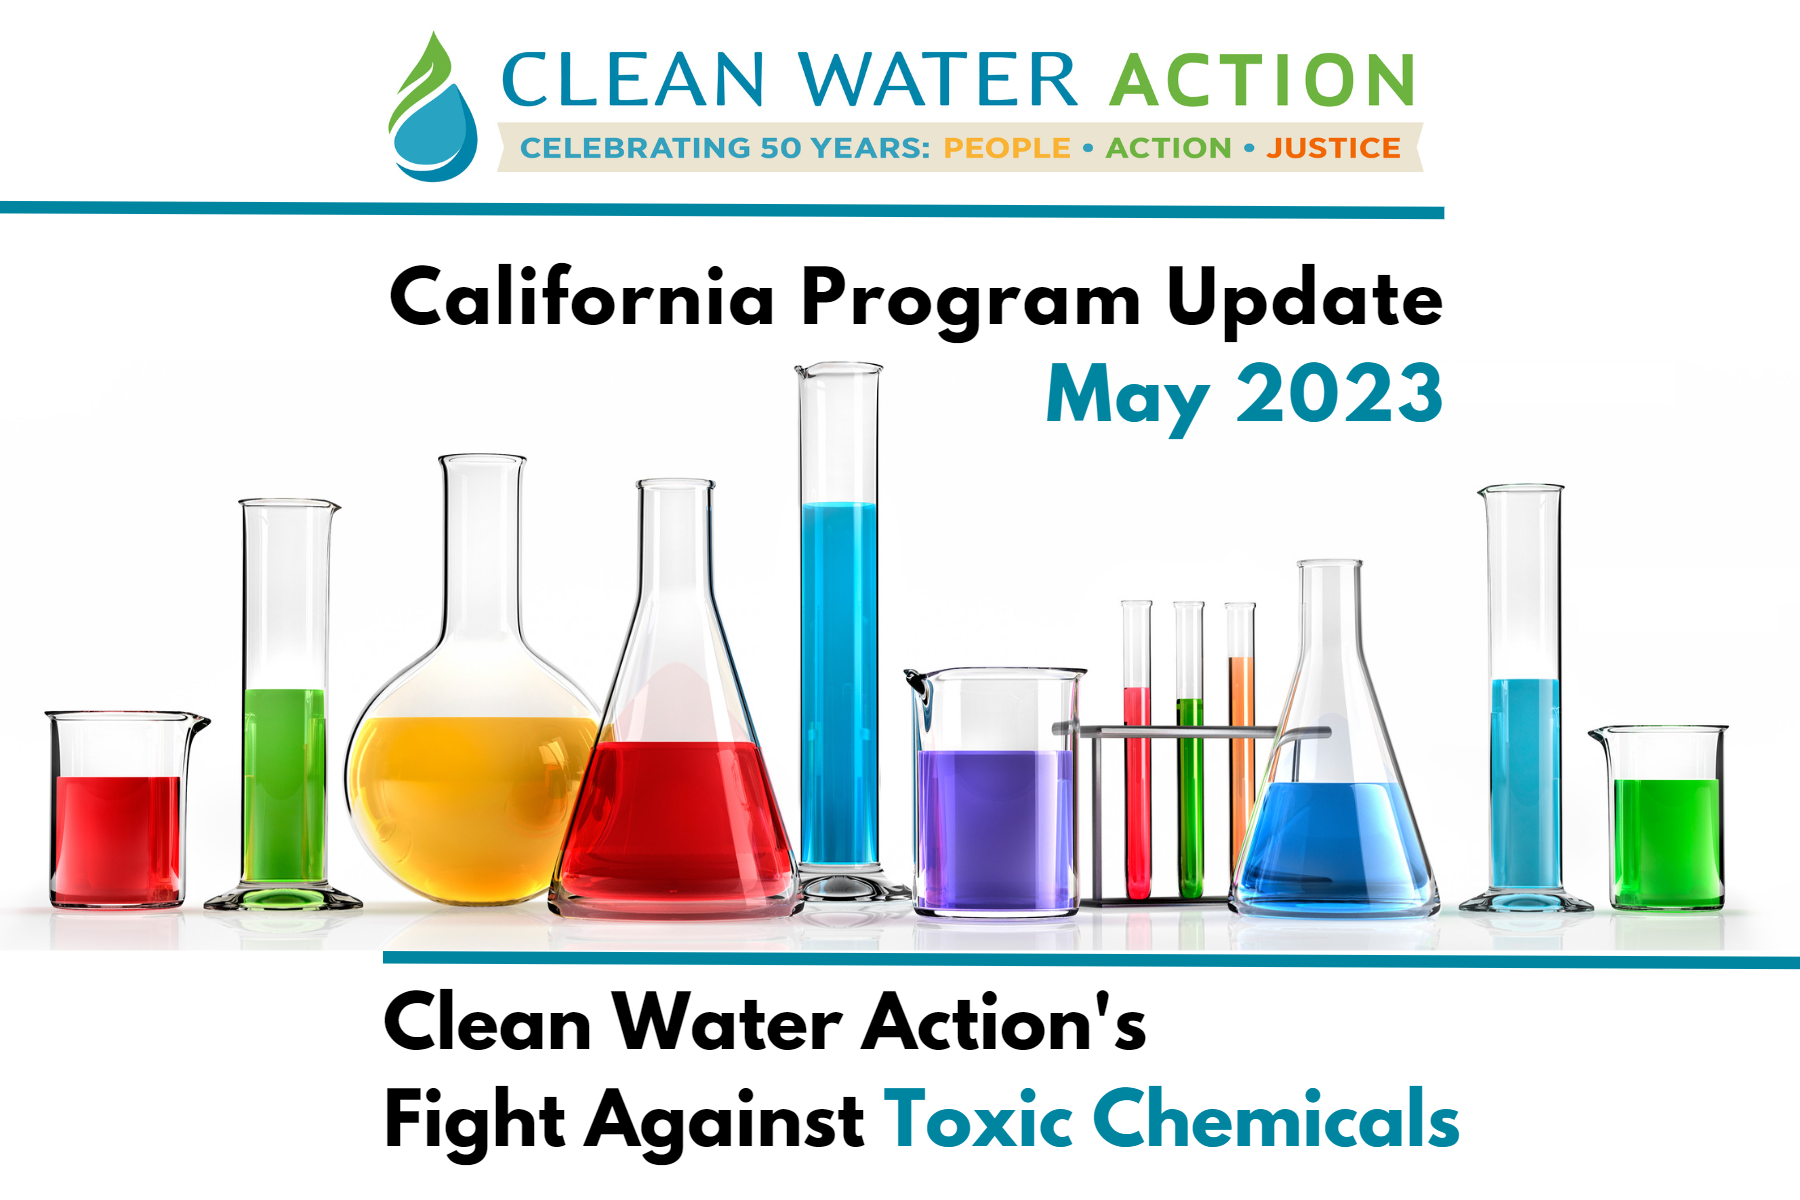 California Program Update May 2023 - Clean Water Action's Fight Against Toxic Chemicals